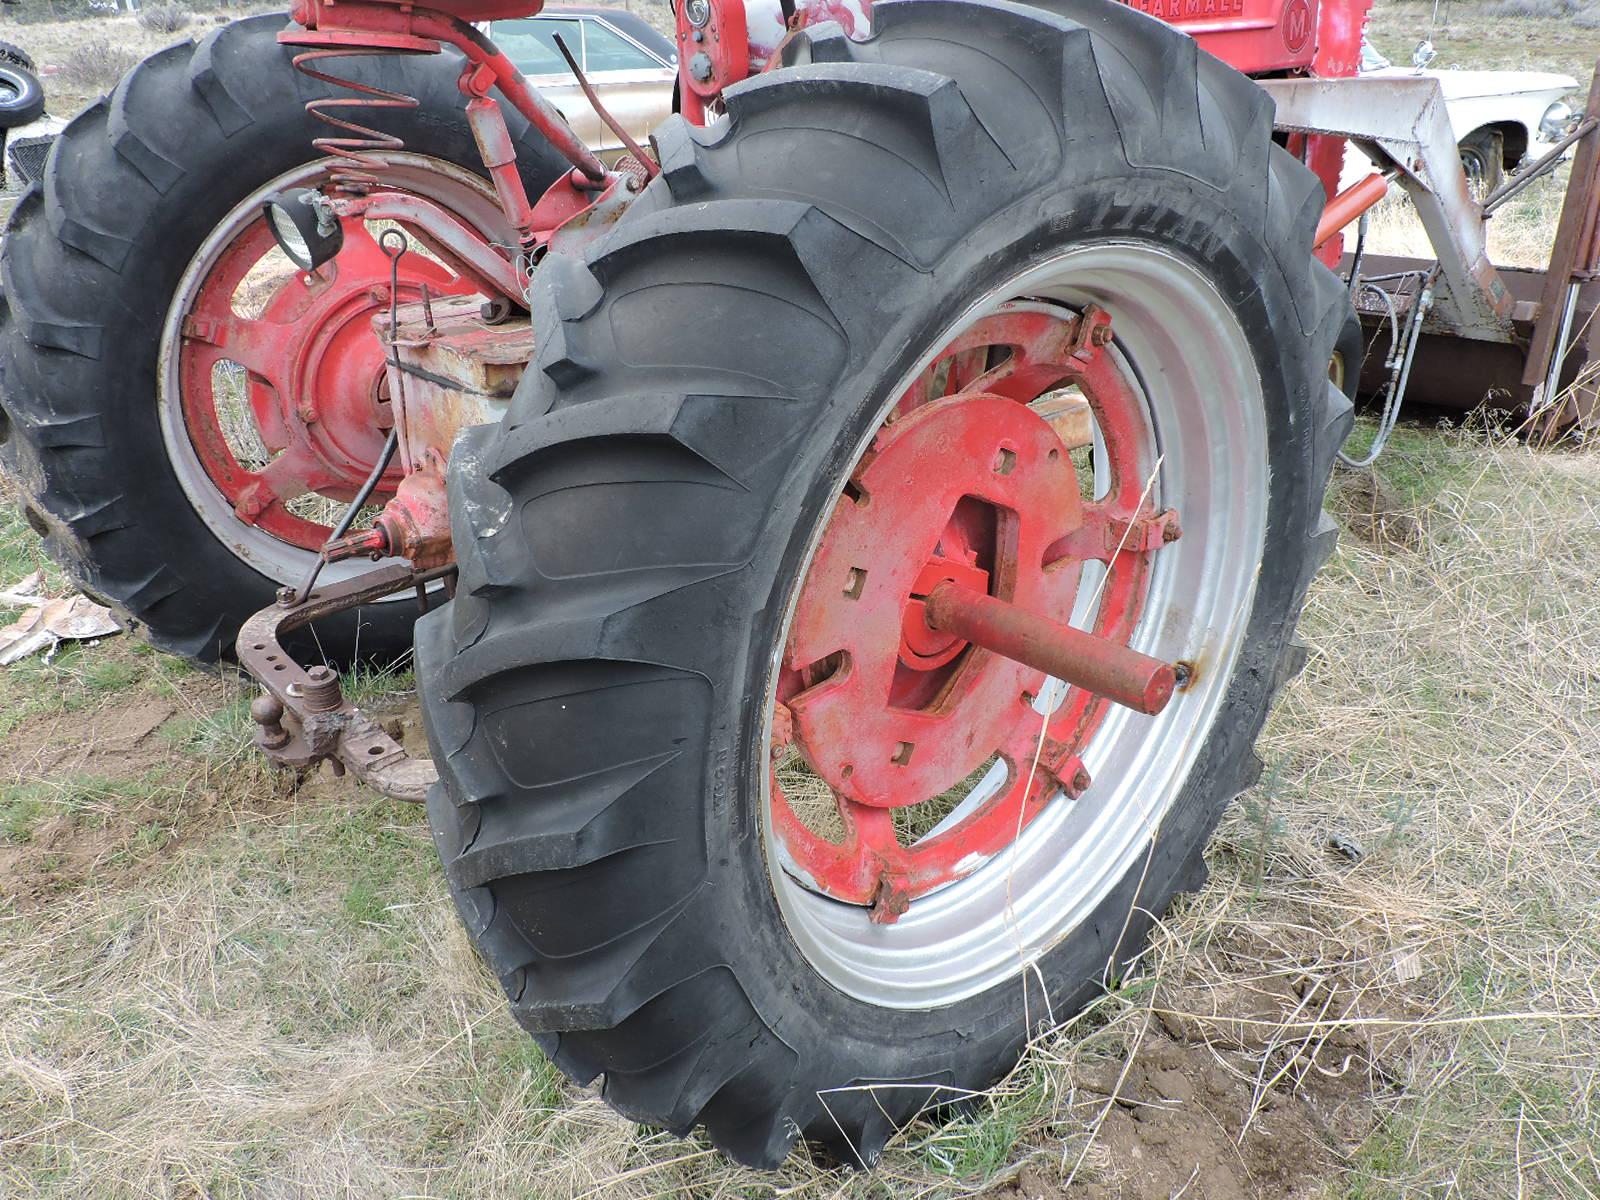 IH FARMALL - Model: 'M' Tractor with Loading Bucket